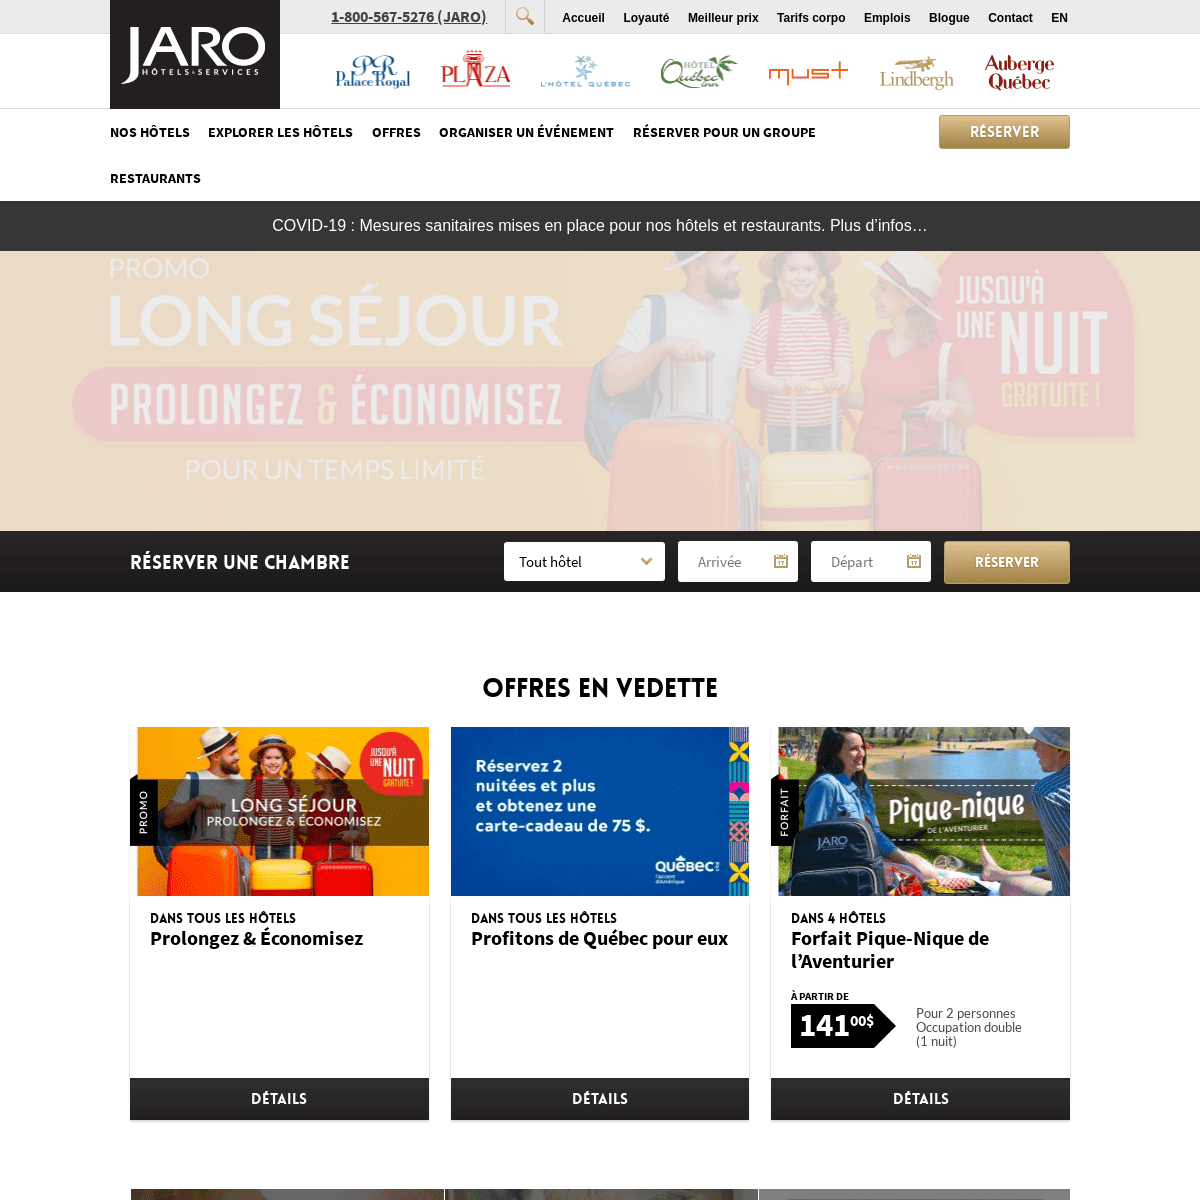 A complete backup of https://hotelsjaro.com